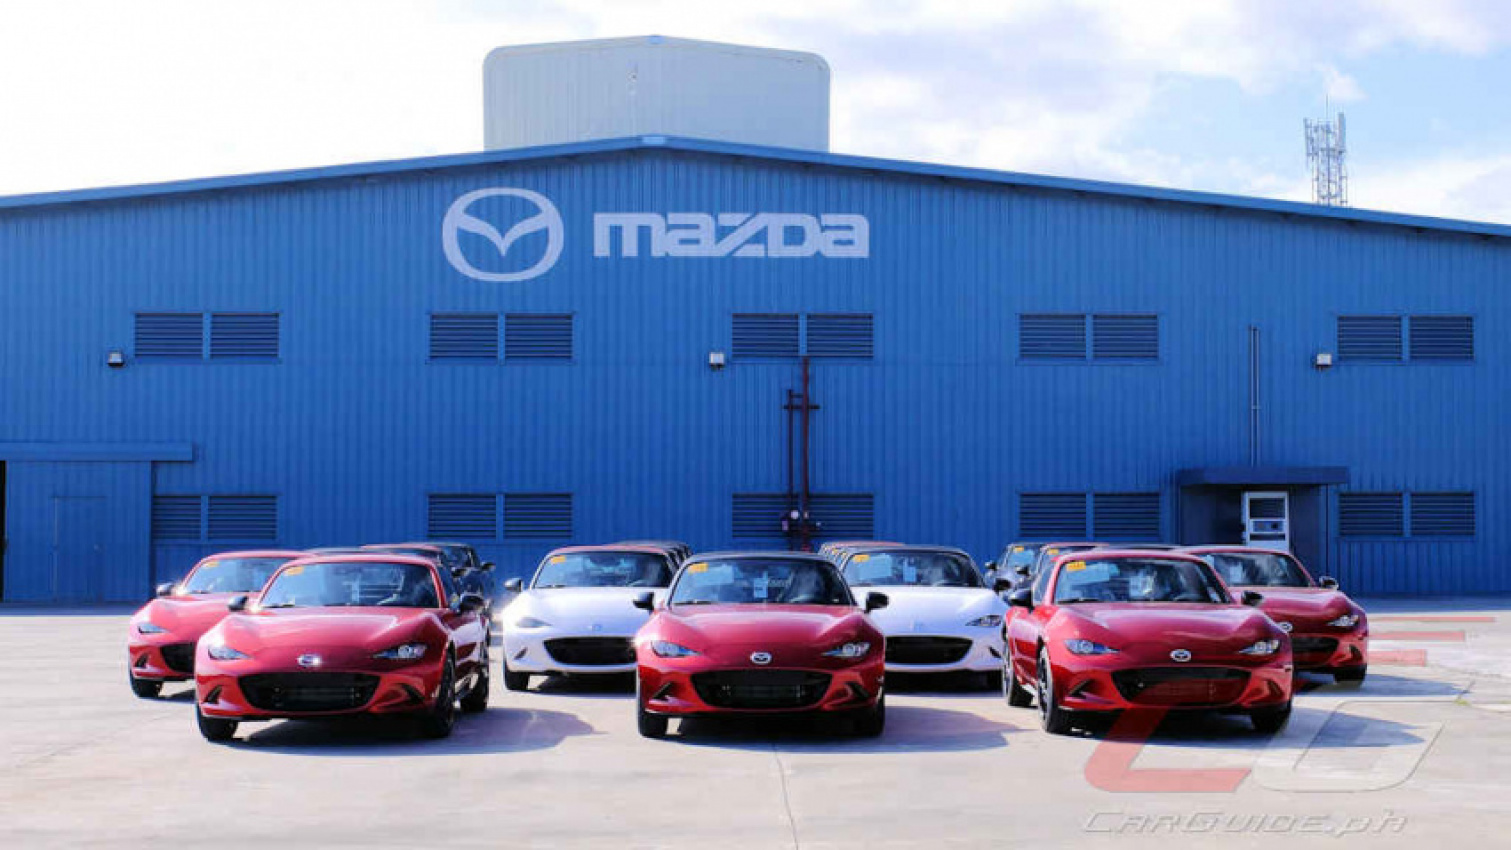 autos, cars, mazda, mazda 2, mazda 3, mazda bt-50, mazda corporate, mazda cx-30, mazda cx-8, mazda cx-9, mazda mx-5, news, after a prolonged wait, mazda customers in the philippines will finally get their brand-new cars